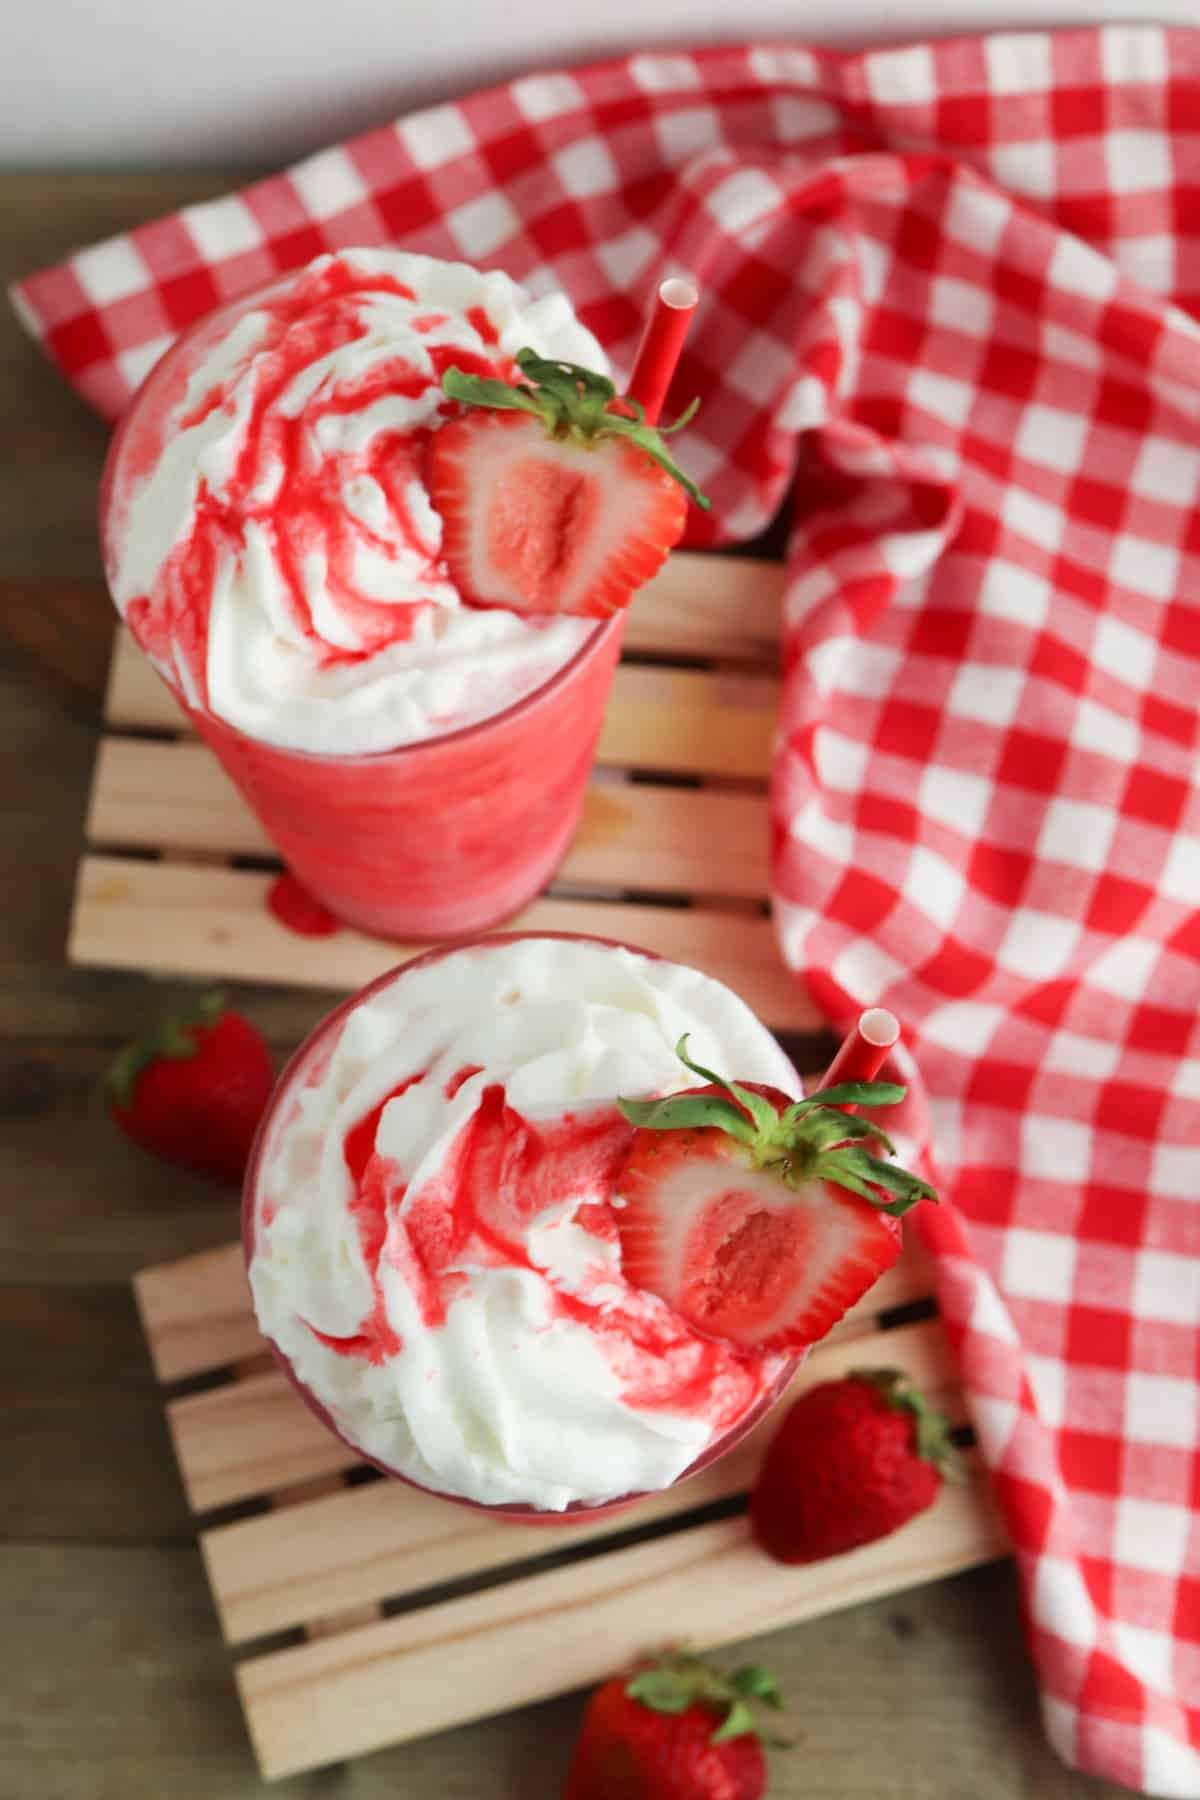 Red drink in a glass with whipped cream and strawberry.